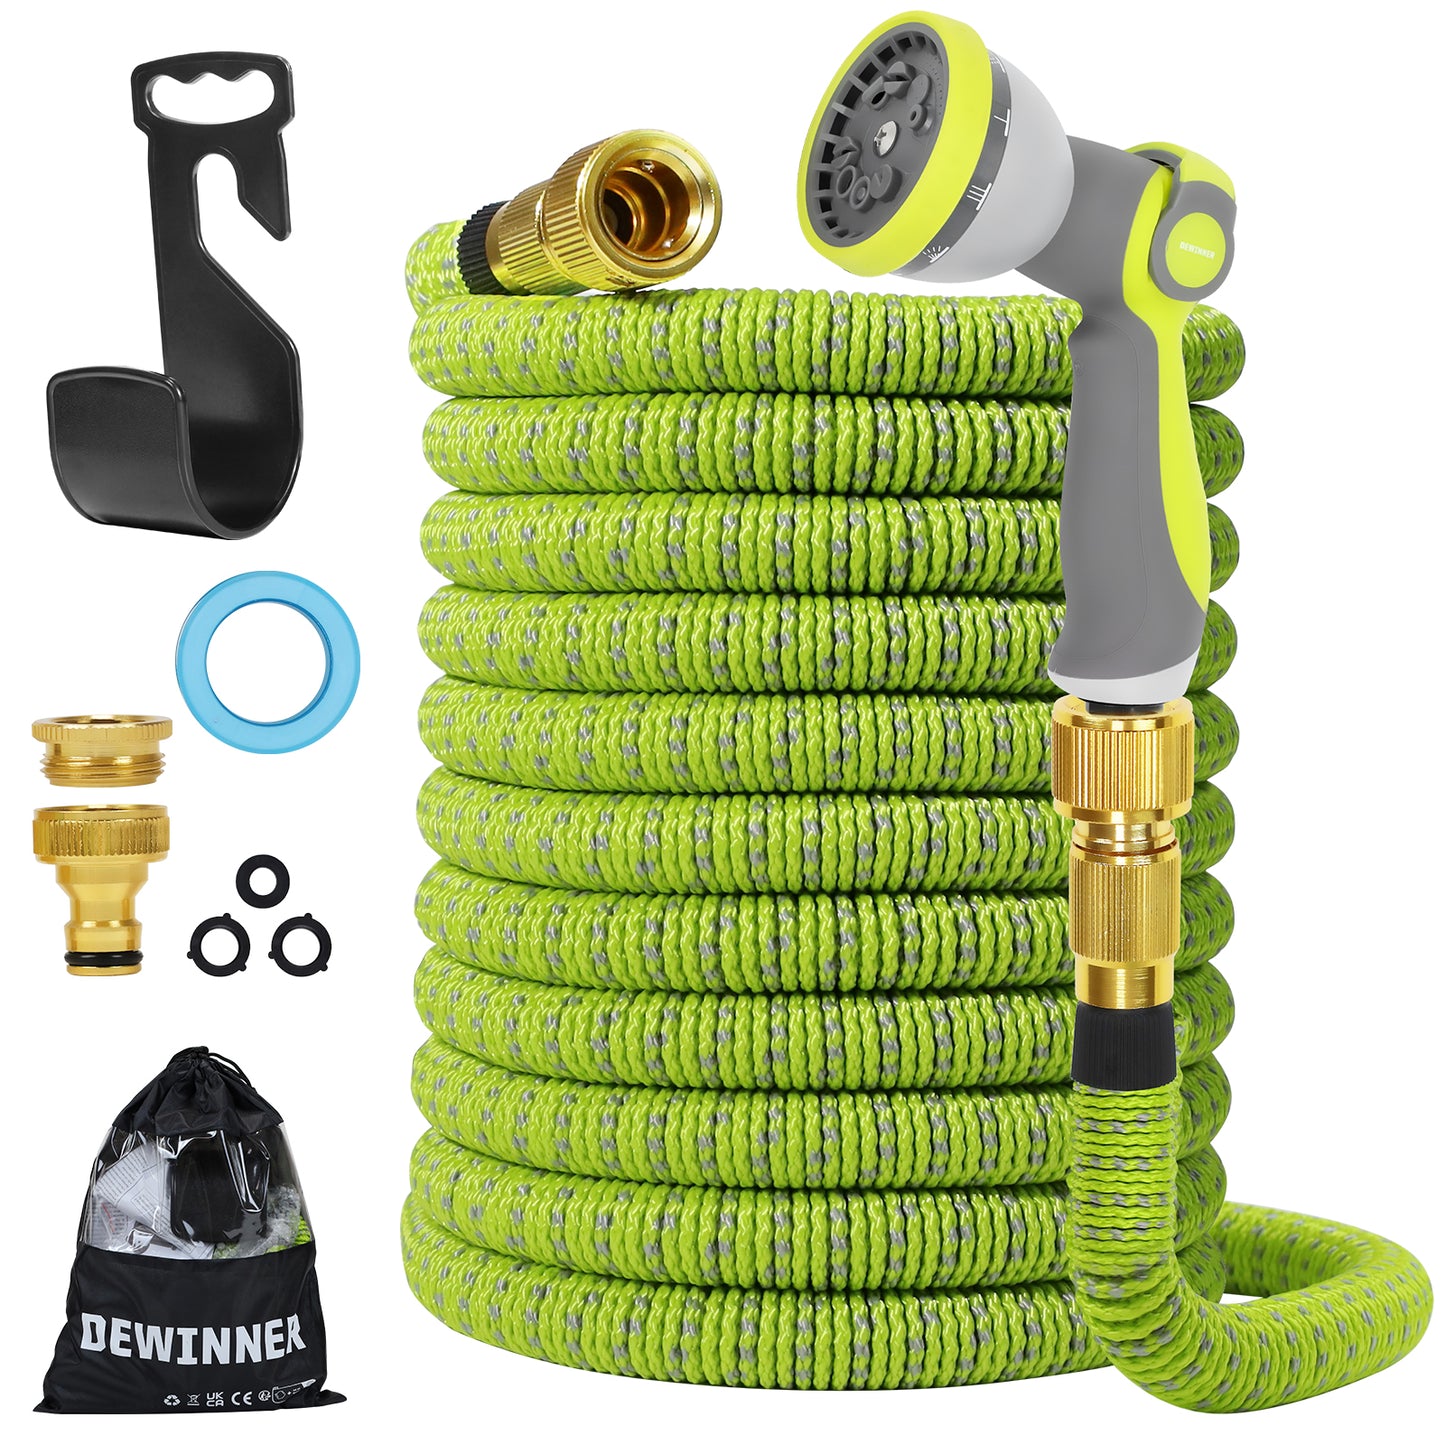 Expandable Garden Hose Pipe, Upgraded 3-Layer Latex No-Kink Flexible Water Hose, 3/4"&1/2" Solid Brass Connectors, 10 Function Spray Nozzle (100ft/50ft)